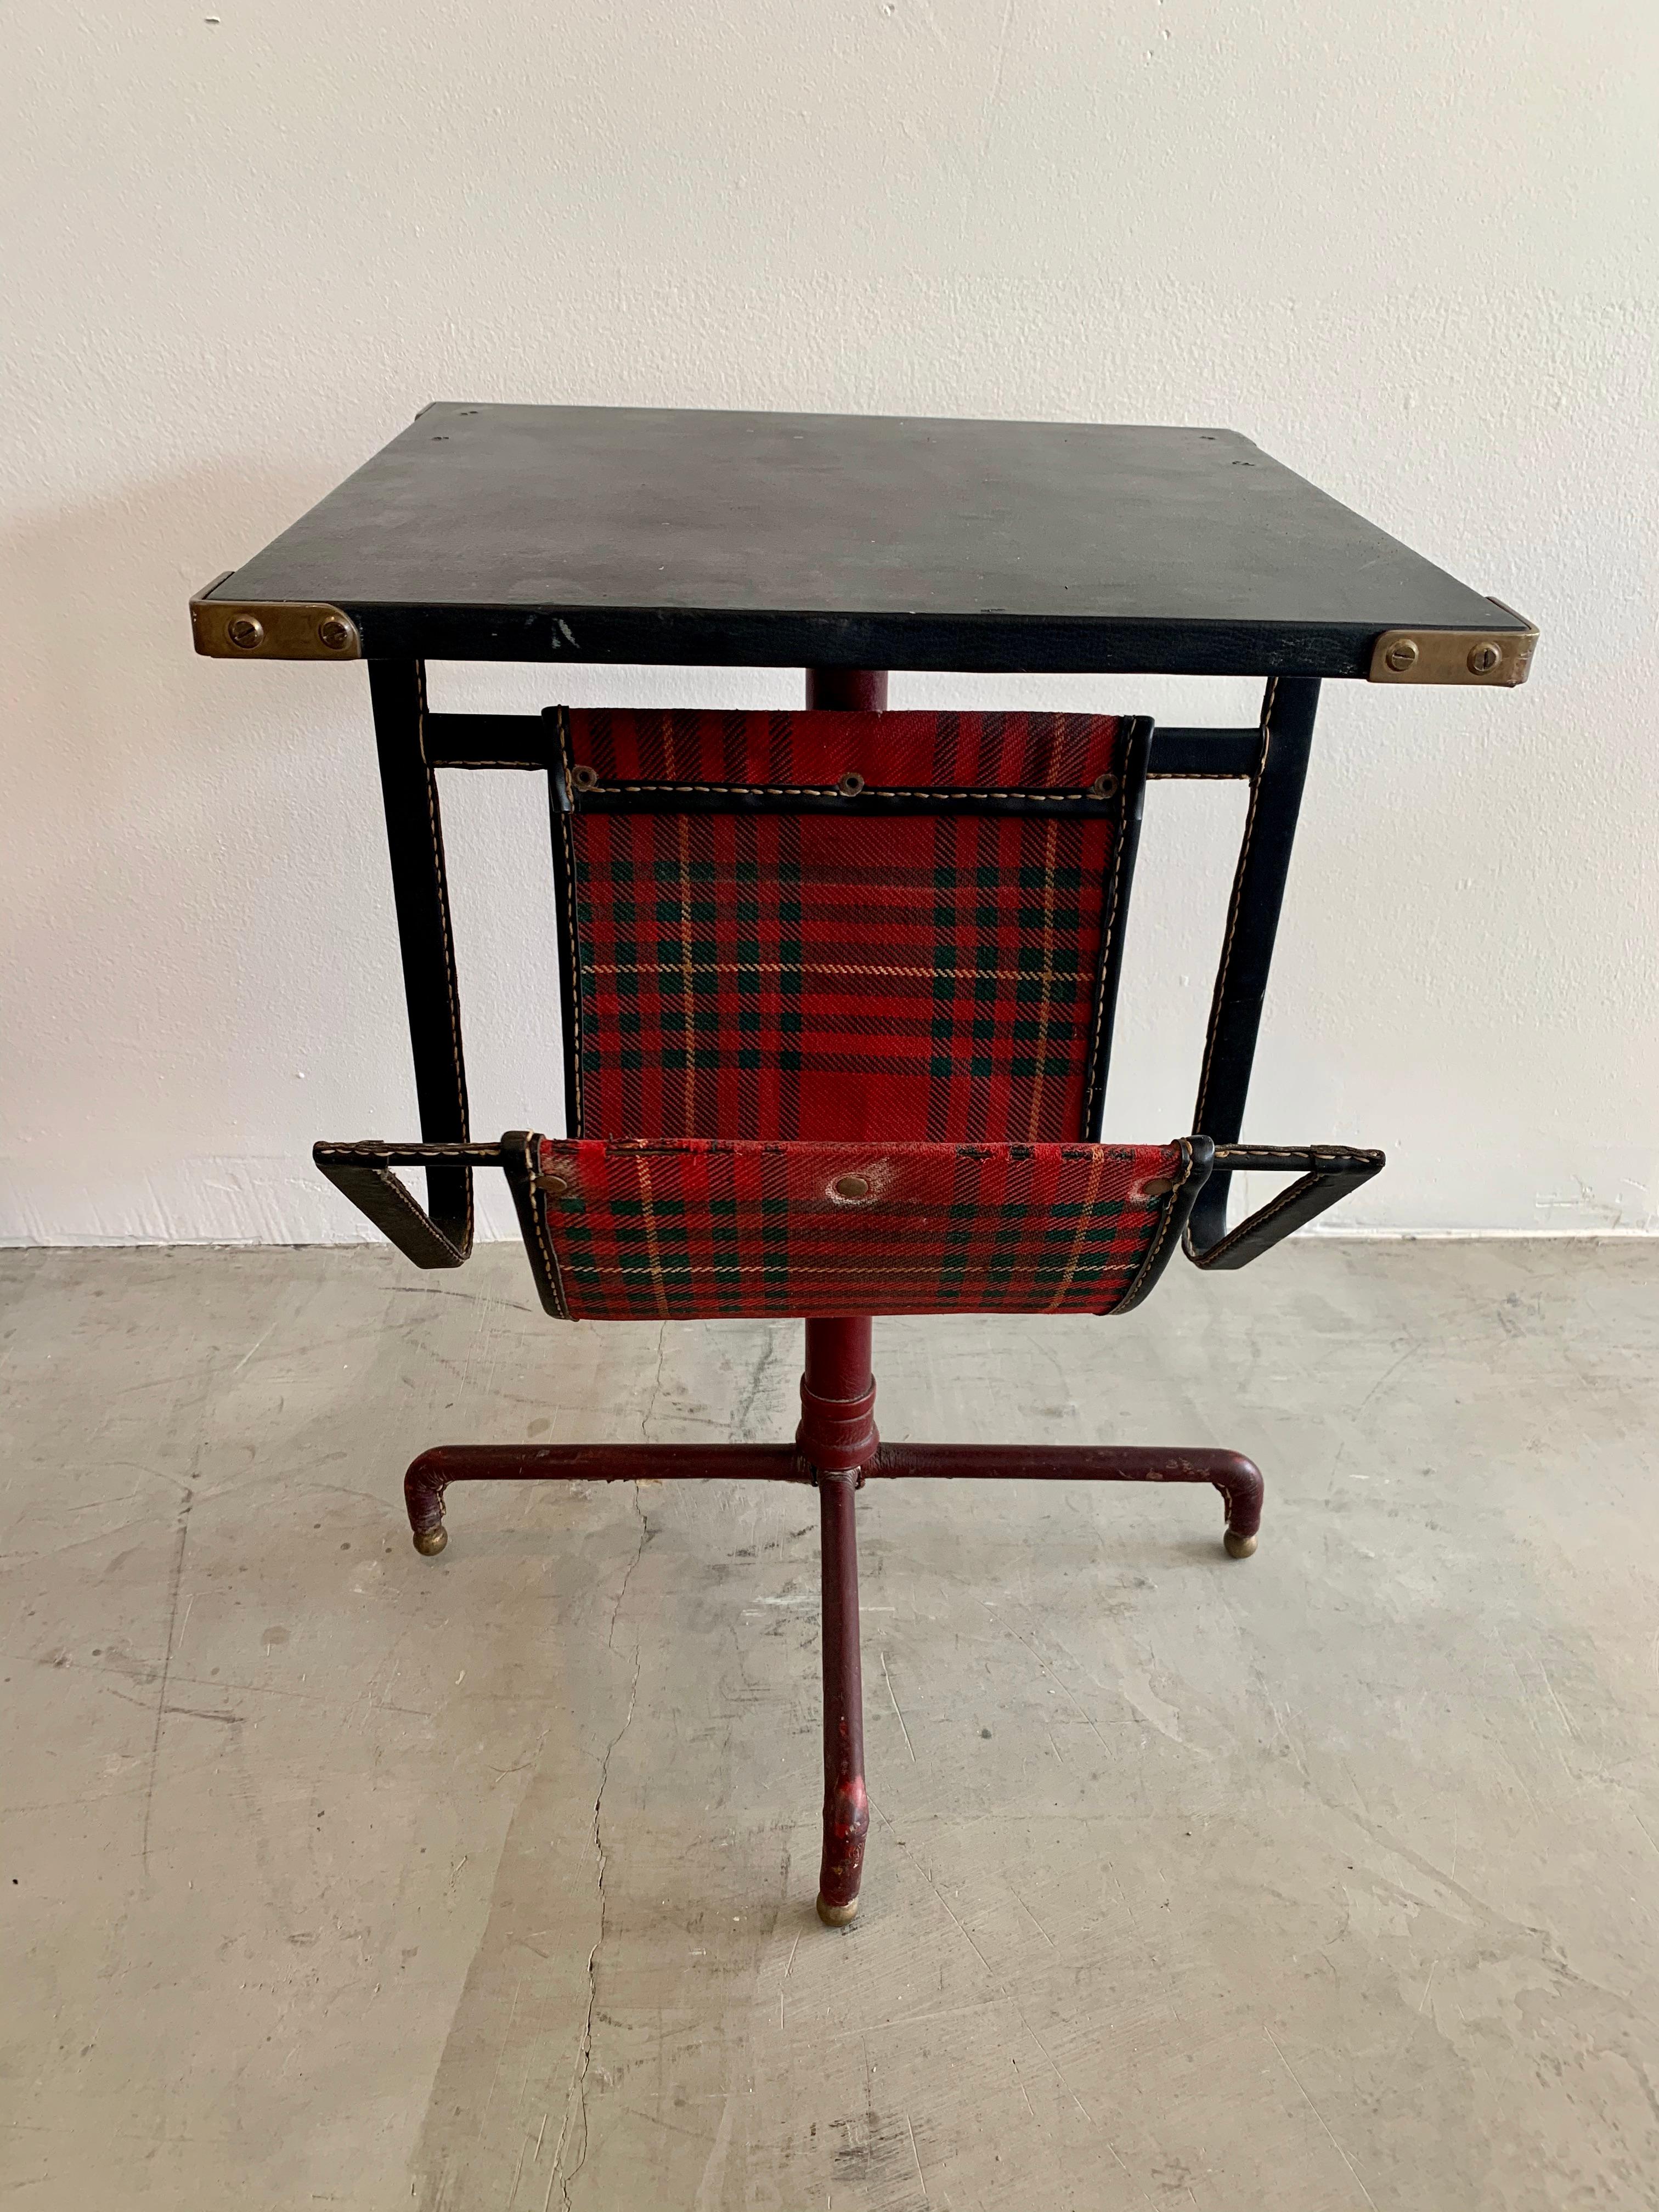 Very unusual side table by Jacques Adnet. Completely wrapped in leather. Tabletop is black leather with brass corners. Frame is also wrapped in black leather and extends down, holding a plaid and leather shelf for holding books or magazines. Base is